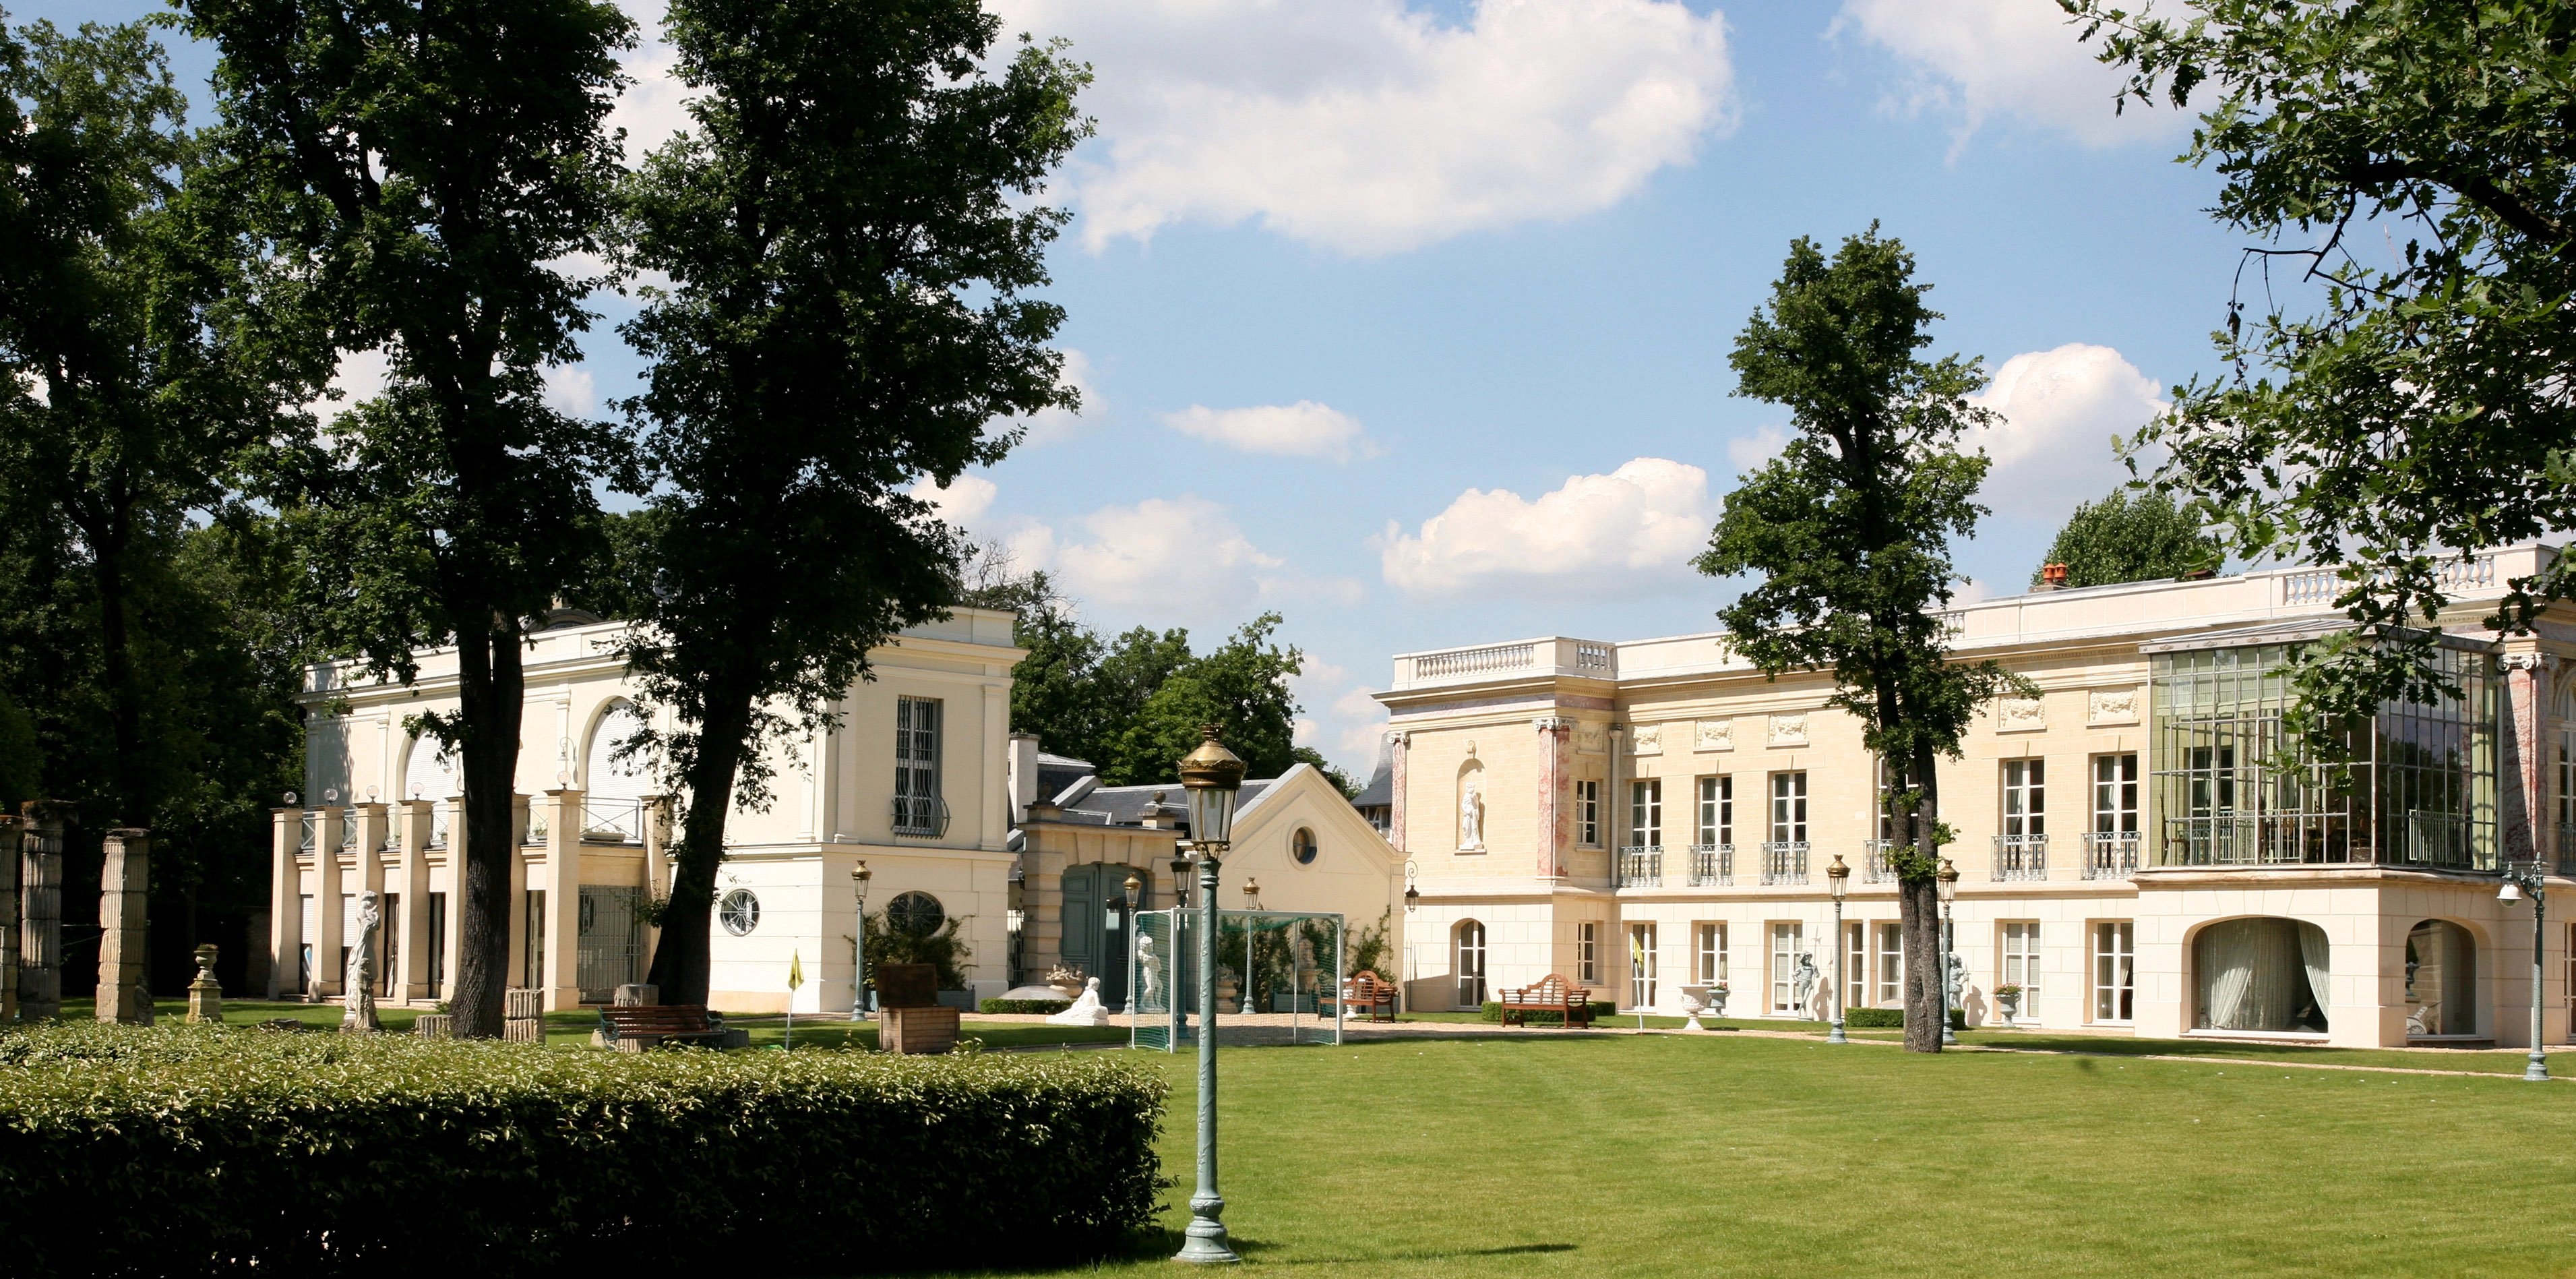 A sublime Palais inspired by Grand Trianon Palace, 20 min from Paris_1490